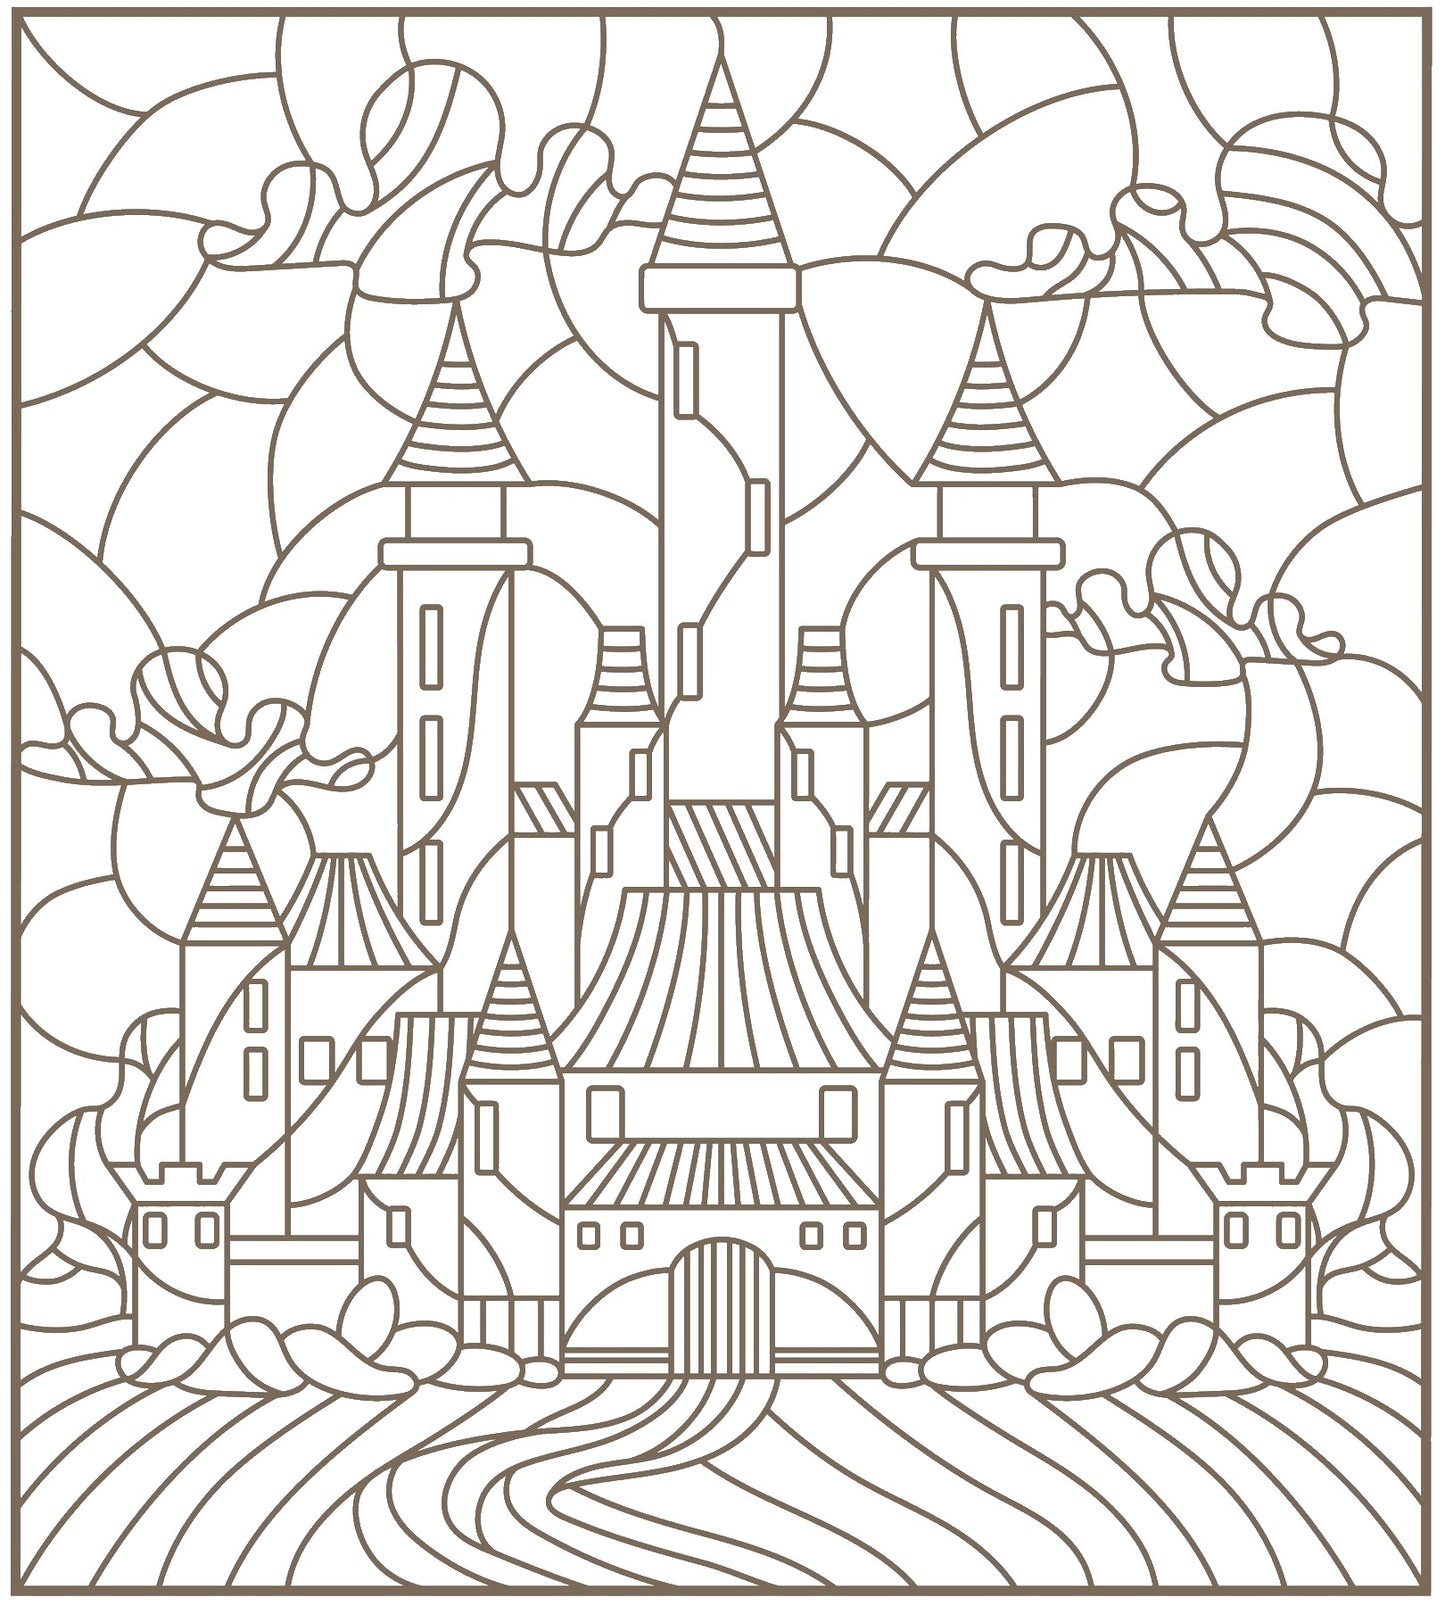 Stained Glass Art Scenic Landscapes, Mosaic Ocean, Picturesque Castles & Ships PDF Coloring Book